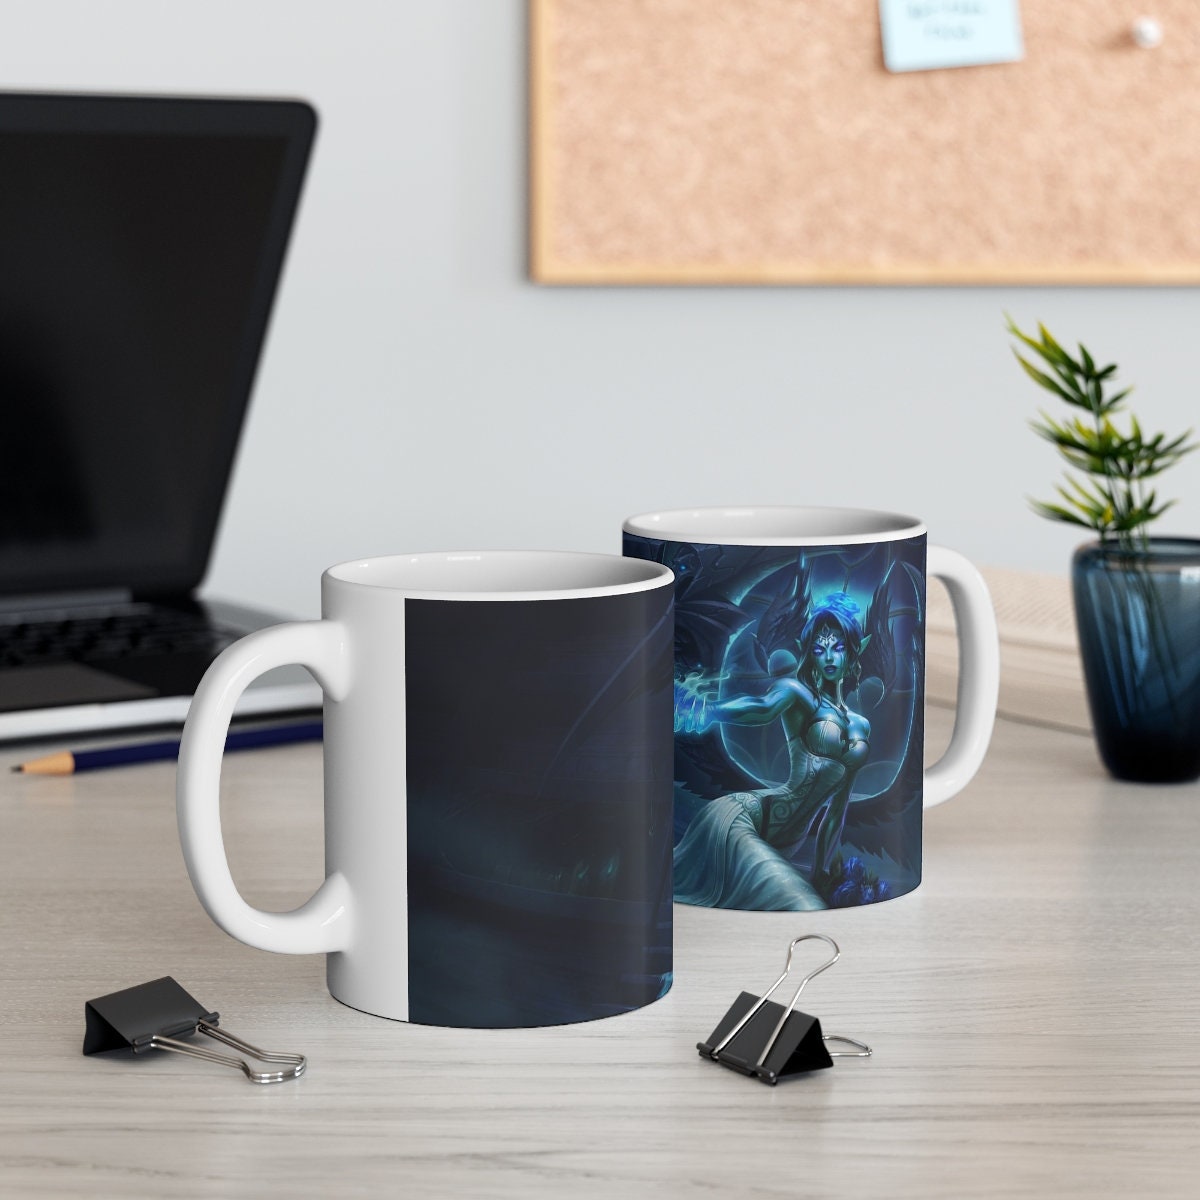 Morgana Nami Pyke Nautilus League Of Legends LOL Support Heroes 4 Personalizable Mugs Arcane Riot Games - League of Legends Fan Store